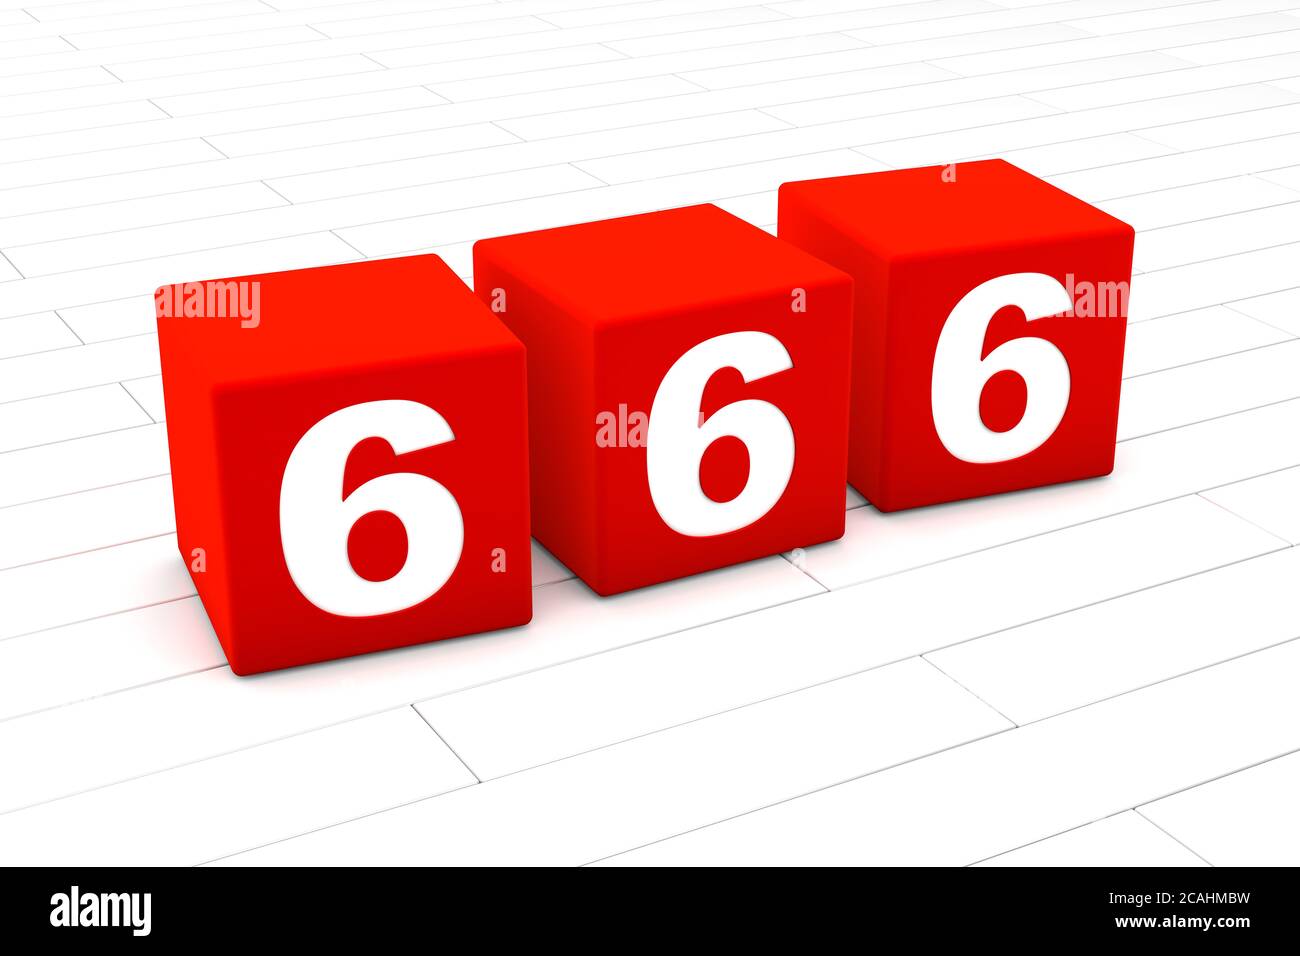 3D illustration of the symbolic number 666 Stock Photo